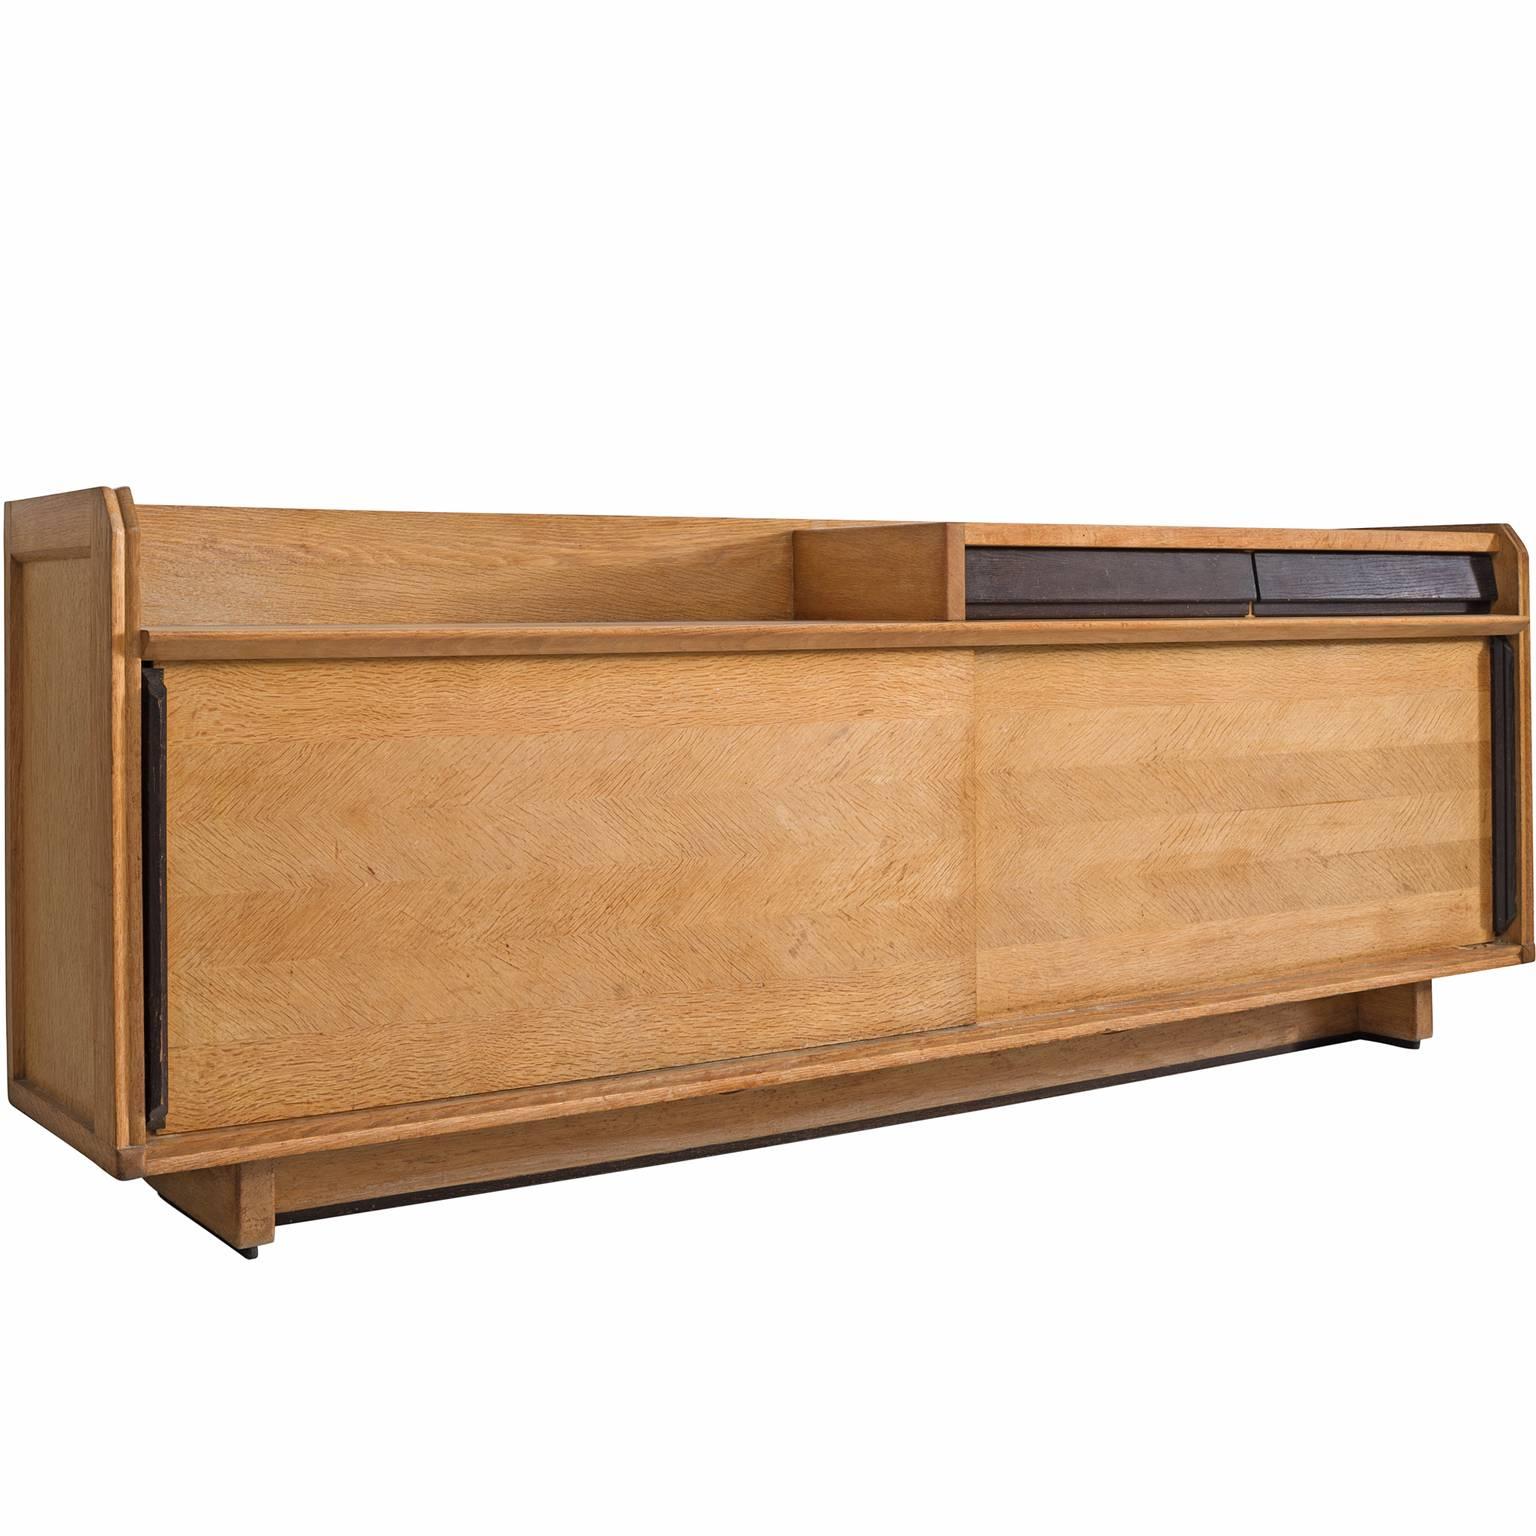 Ceramic and Oak Guillerme and Chambron Credenza